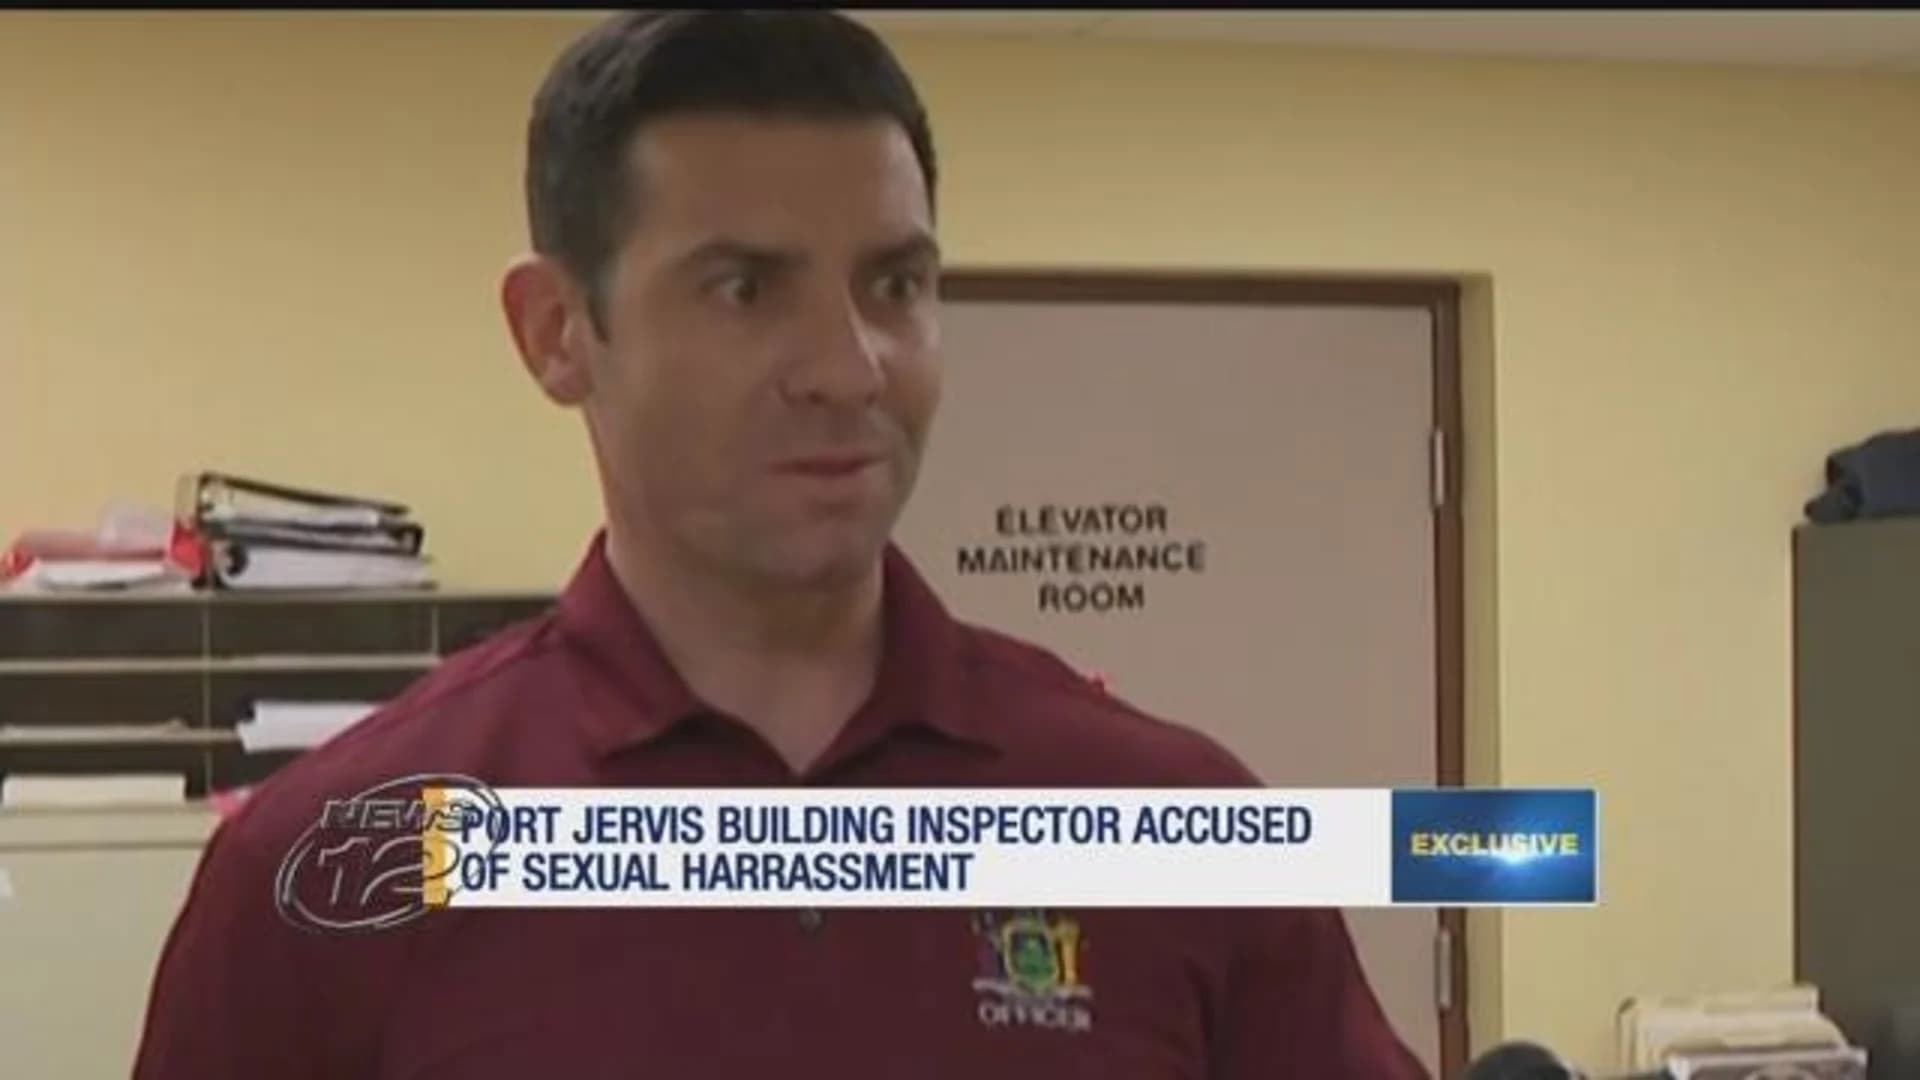 2nd woman accuses Port Jervis building inspector of sexual harassment